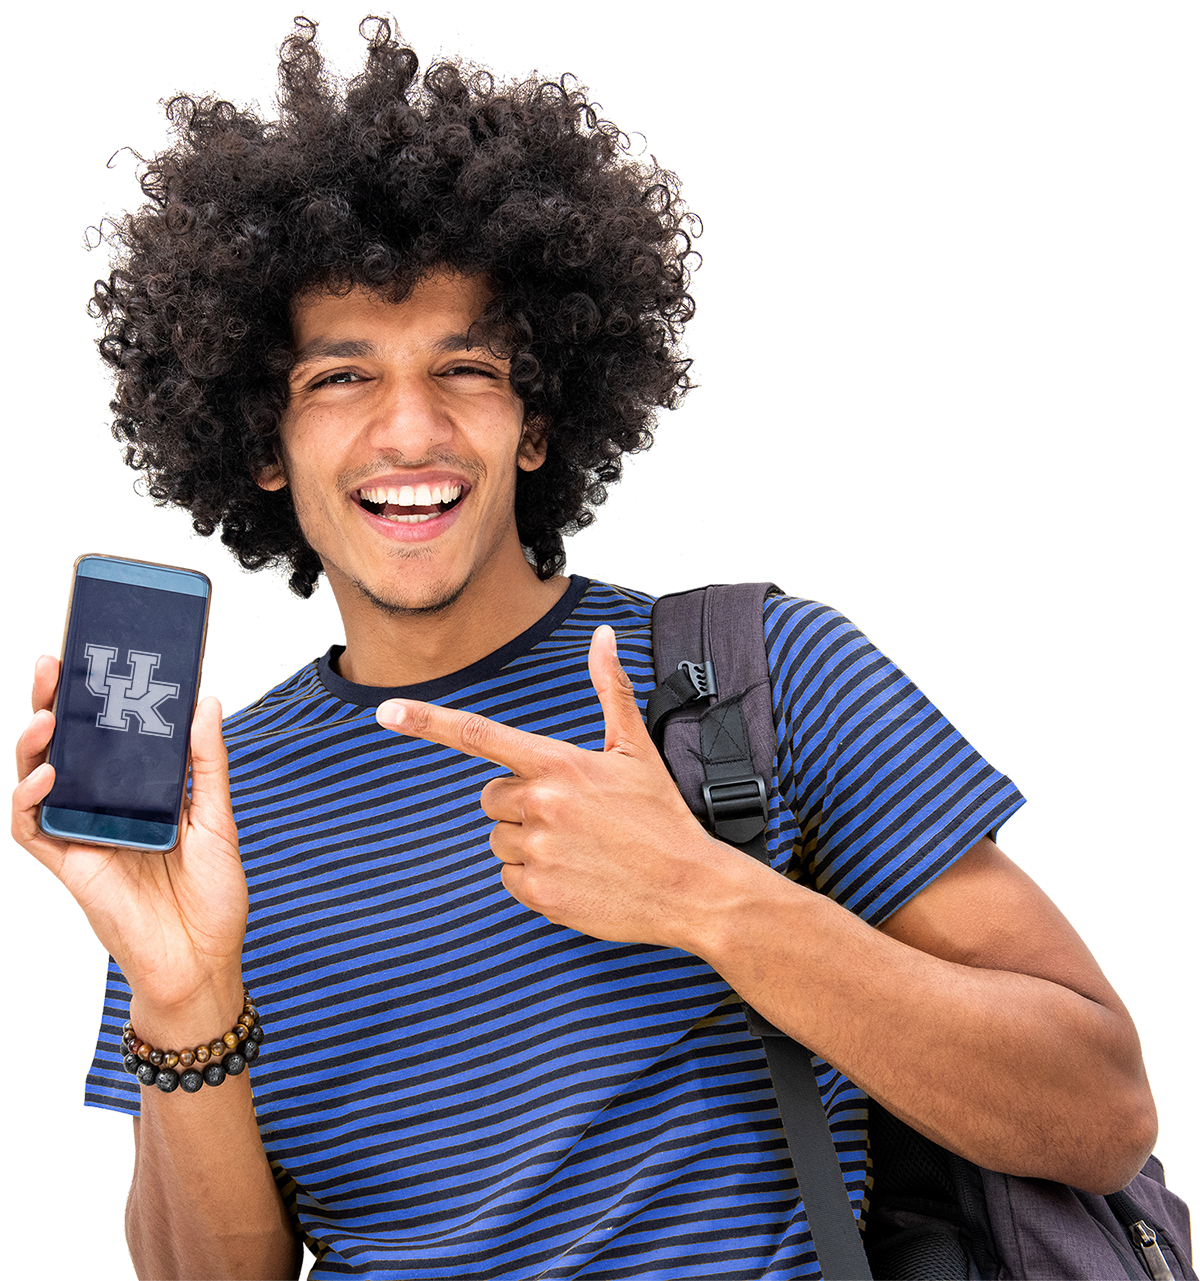 Happy young man holding a mobile phone with a University of Kentucky logo on the screen.